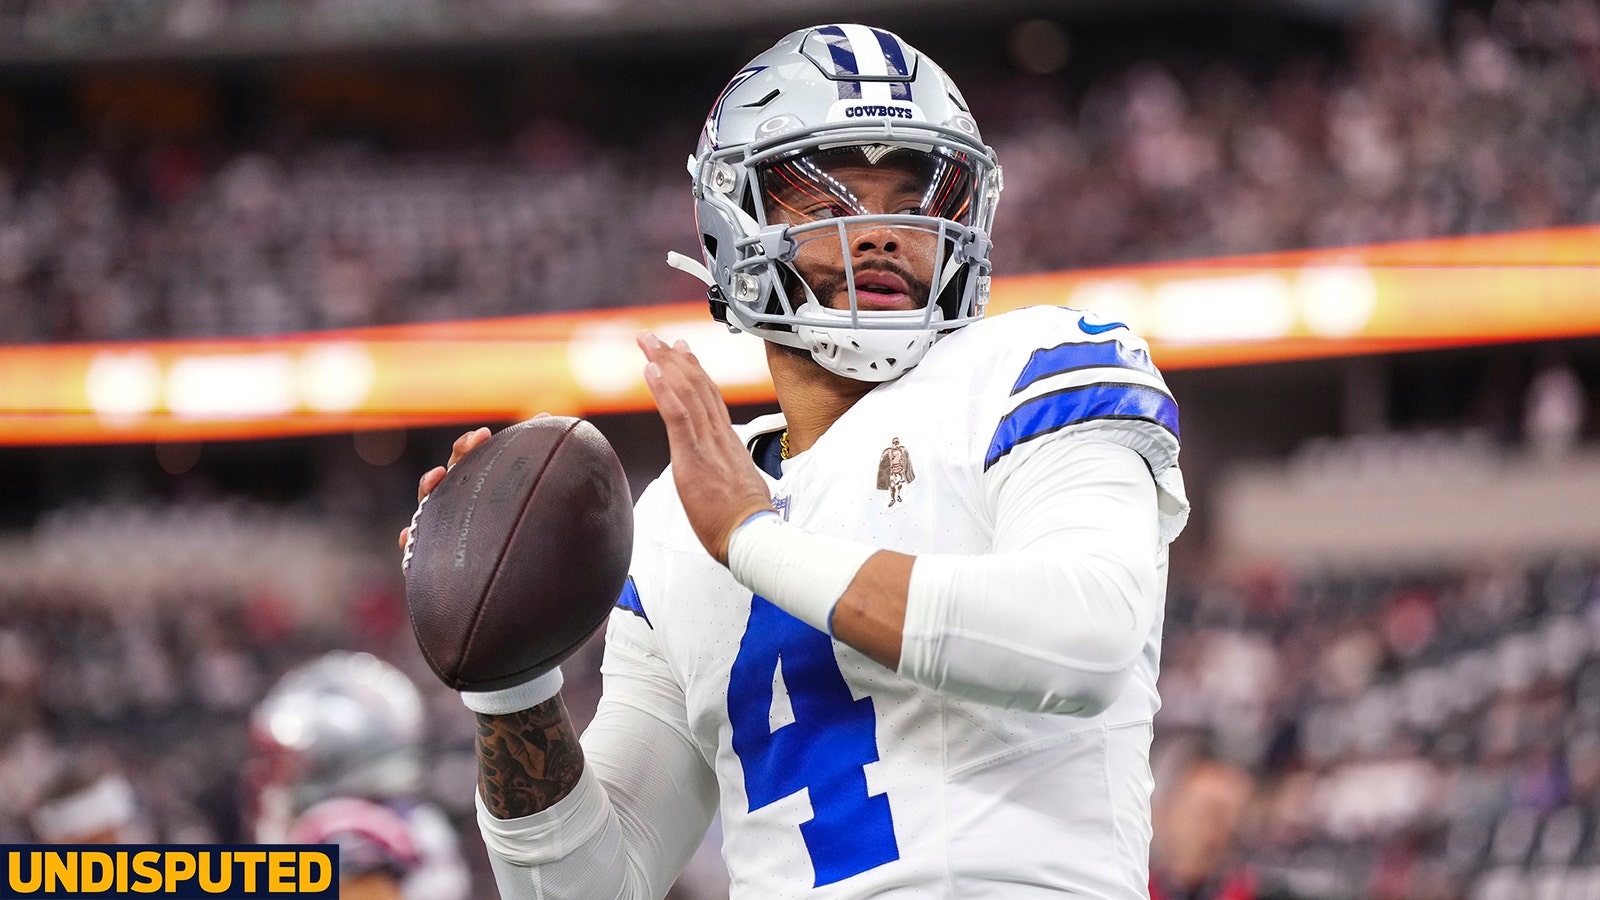 Jerry Jones: "Dak can get us to the Super Bowl" 